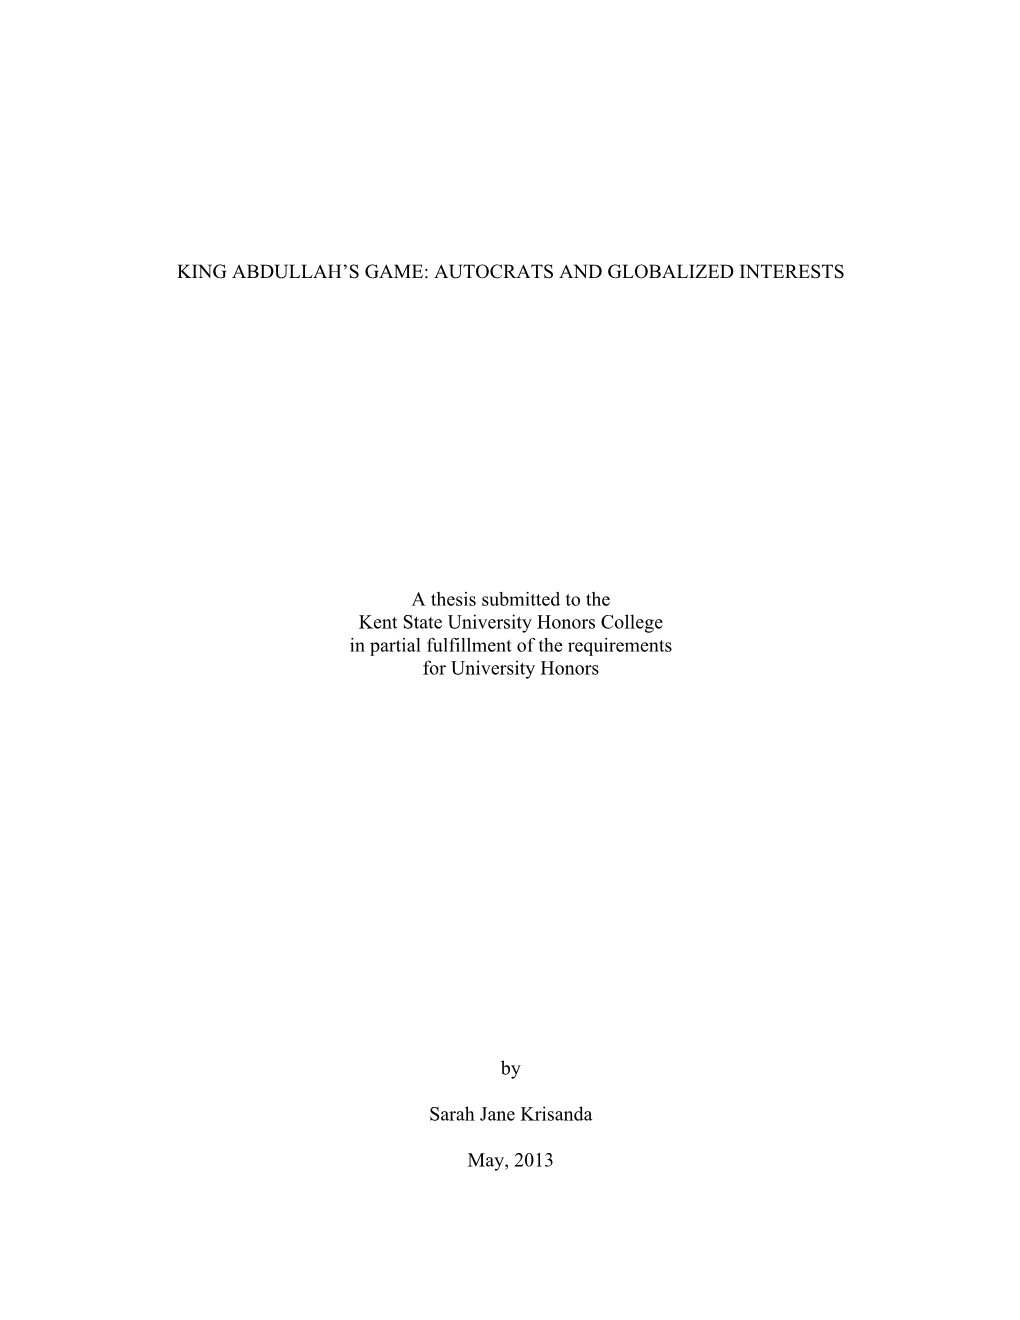 KING ABDULLAH's GAME: AUTOCRATS and GLOBALIZED INTERESTS a Thesis Submitted to the Kent State University Honors College In